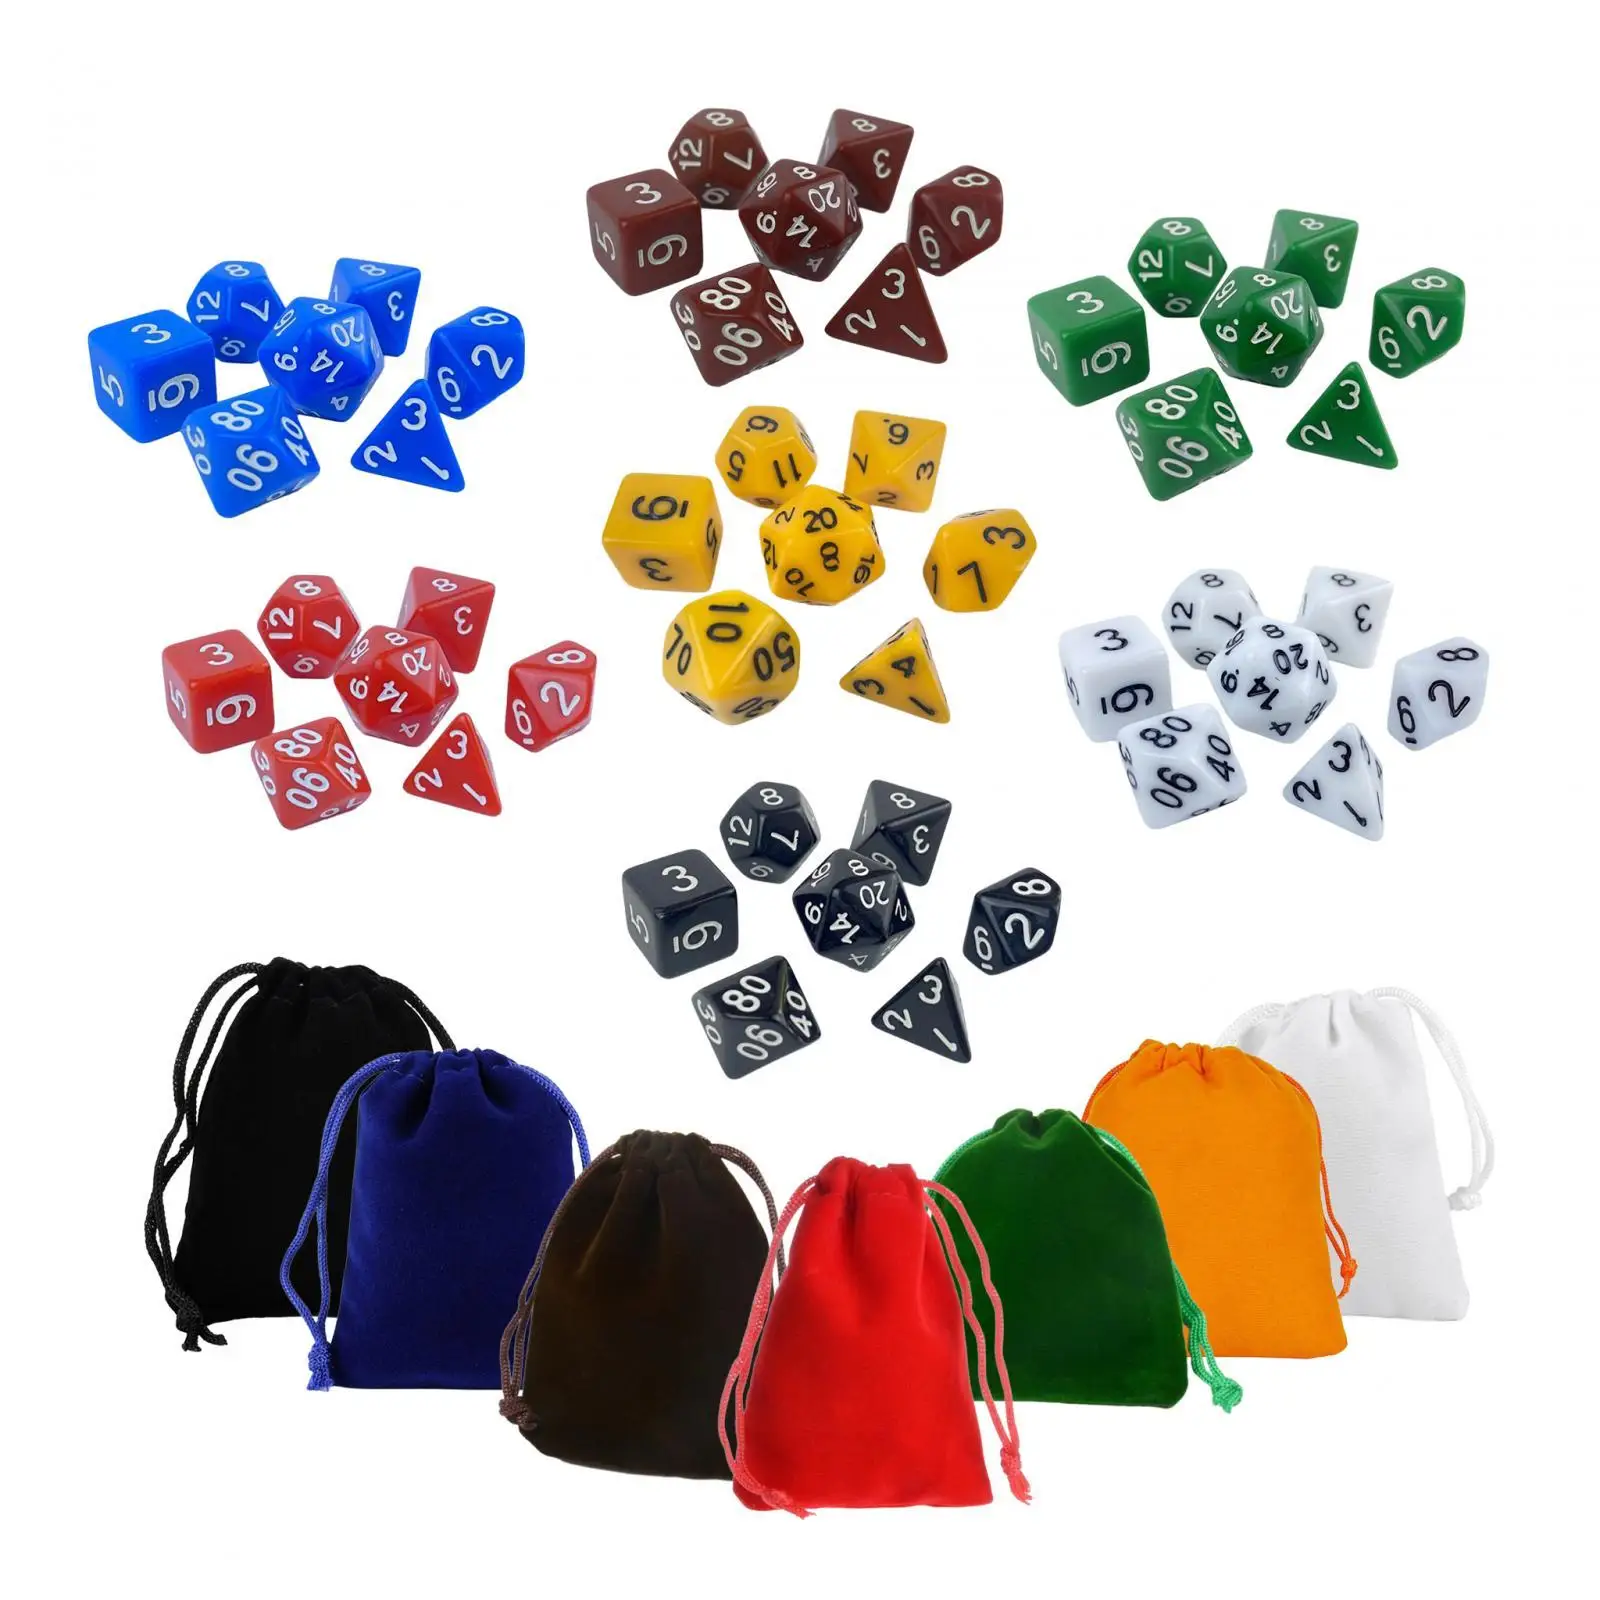 49 Pieces Game Dices Set Math Counting Teaching Aids Dice Set Card Games